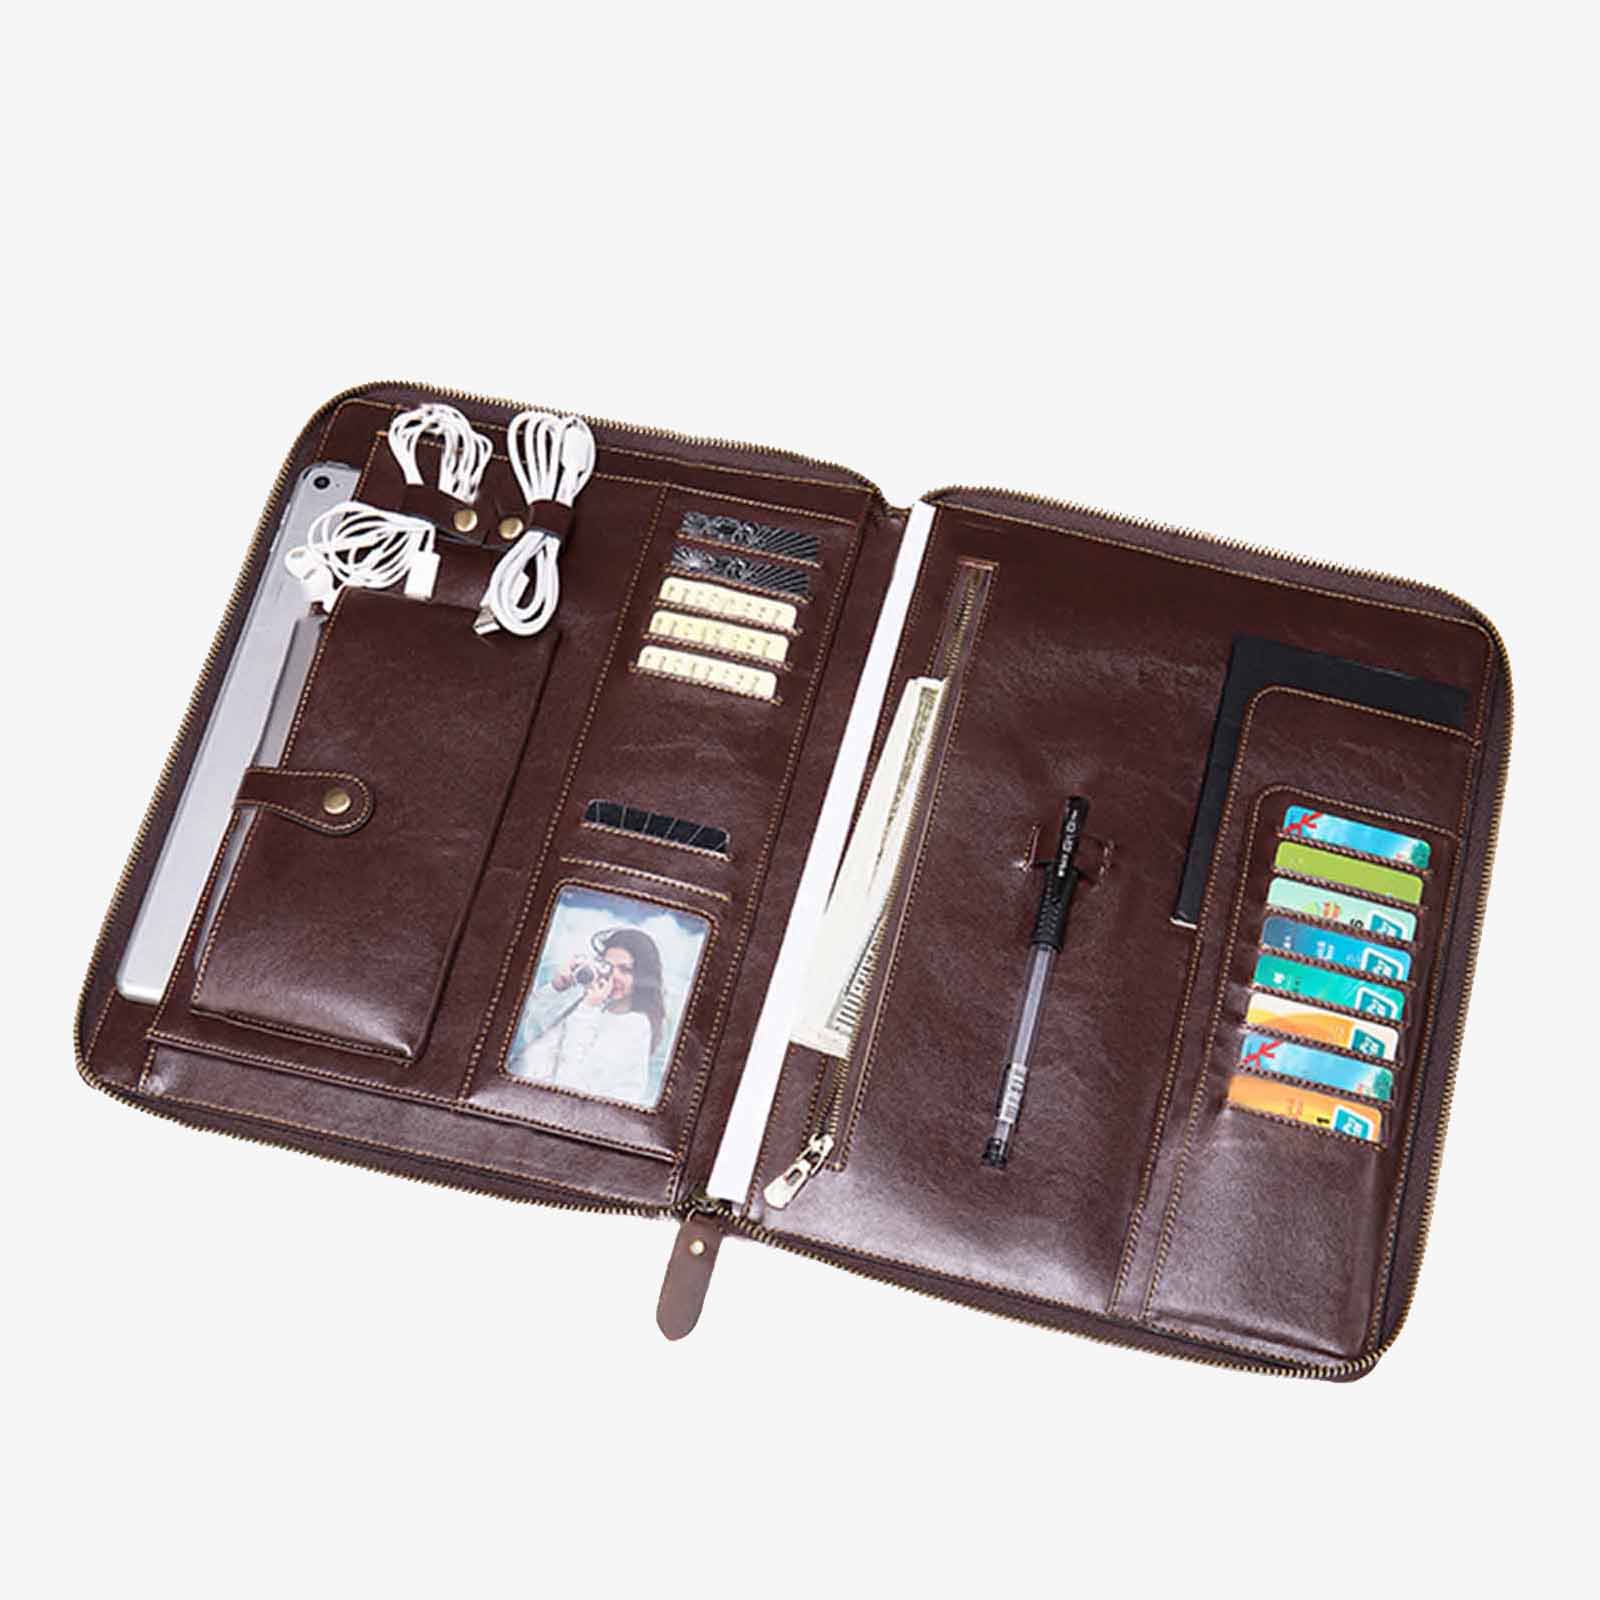 All In One Vintage Ipad Case With Pencil Holder